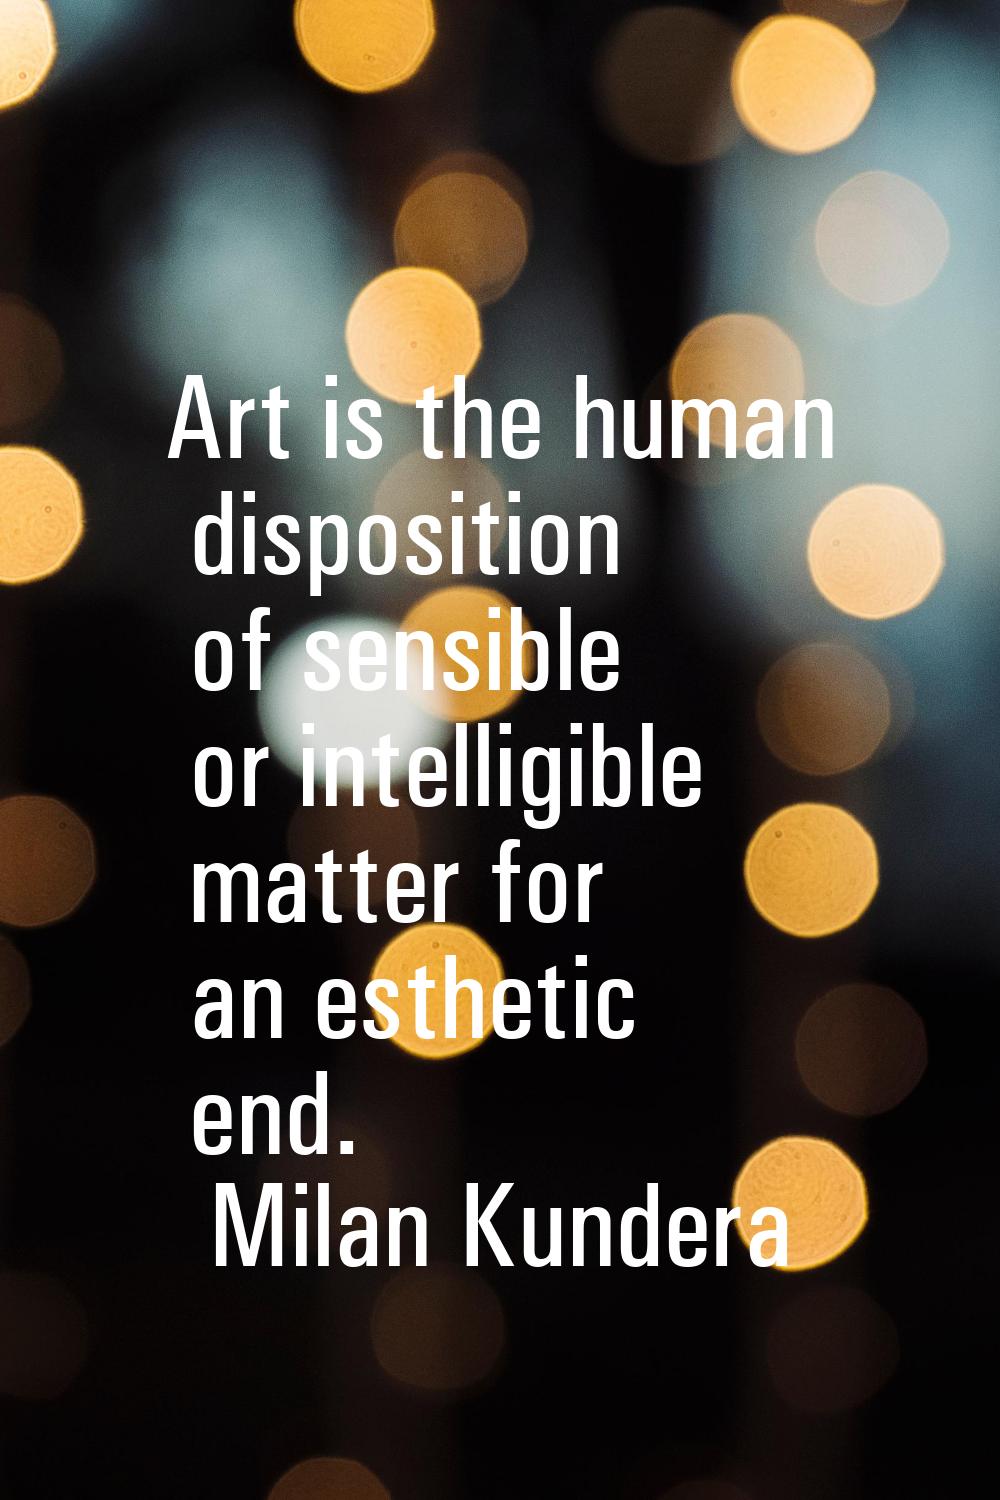 Art is the human disposition of sensible or intelligible matter for an esthetic end.